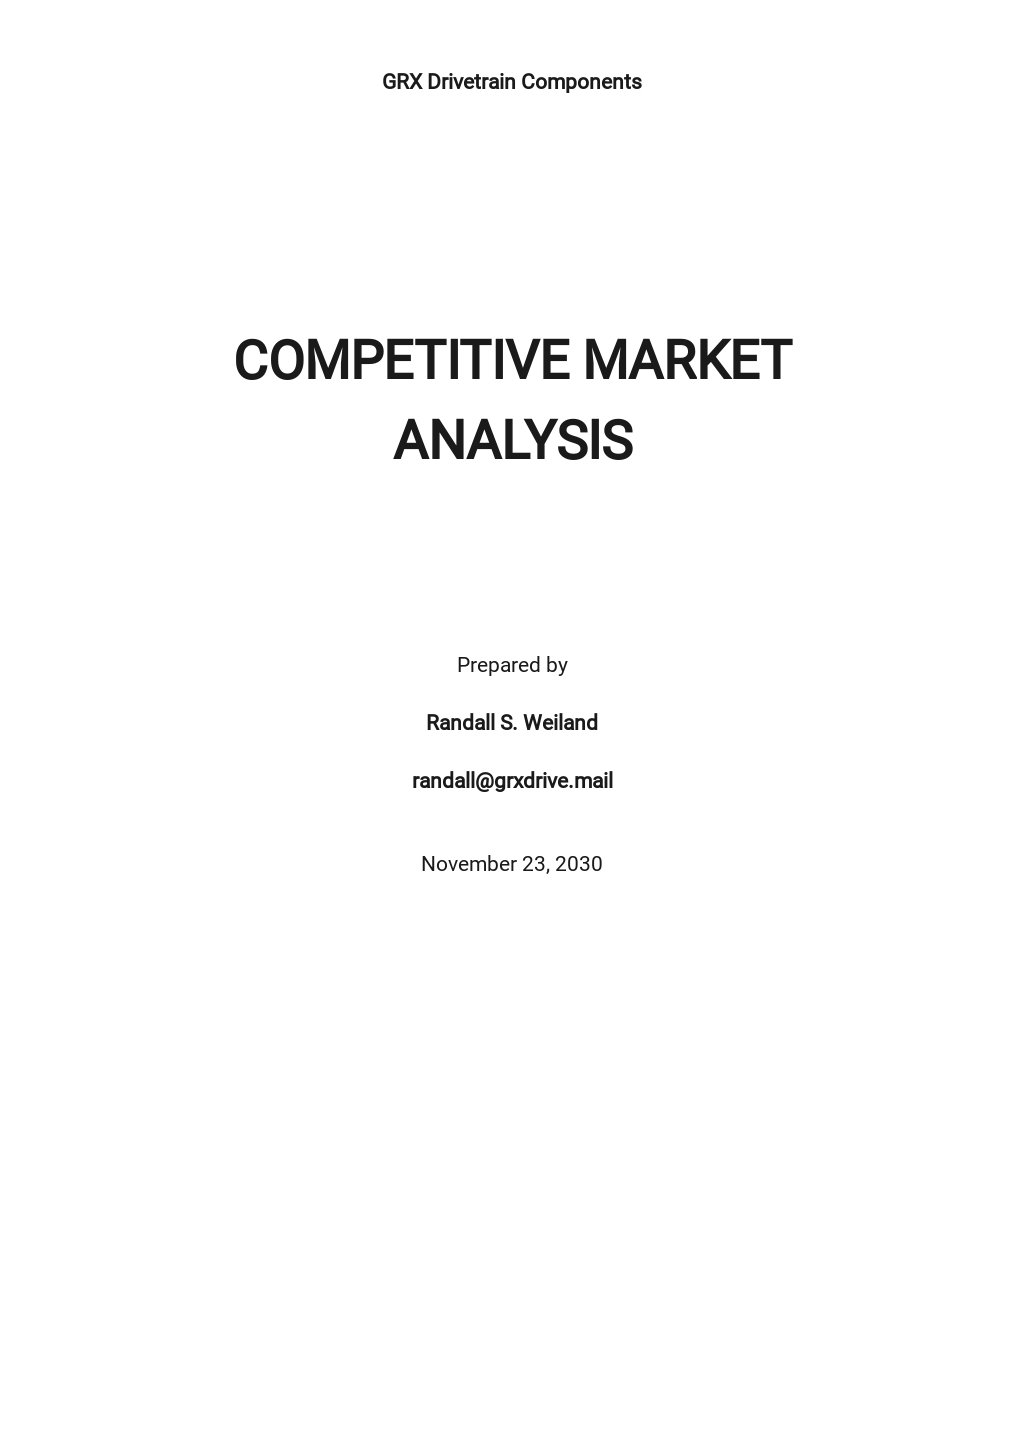 comparative market analysis cover letter